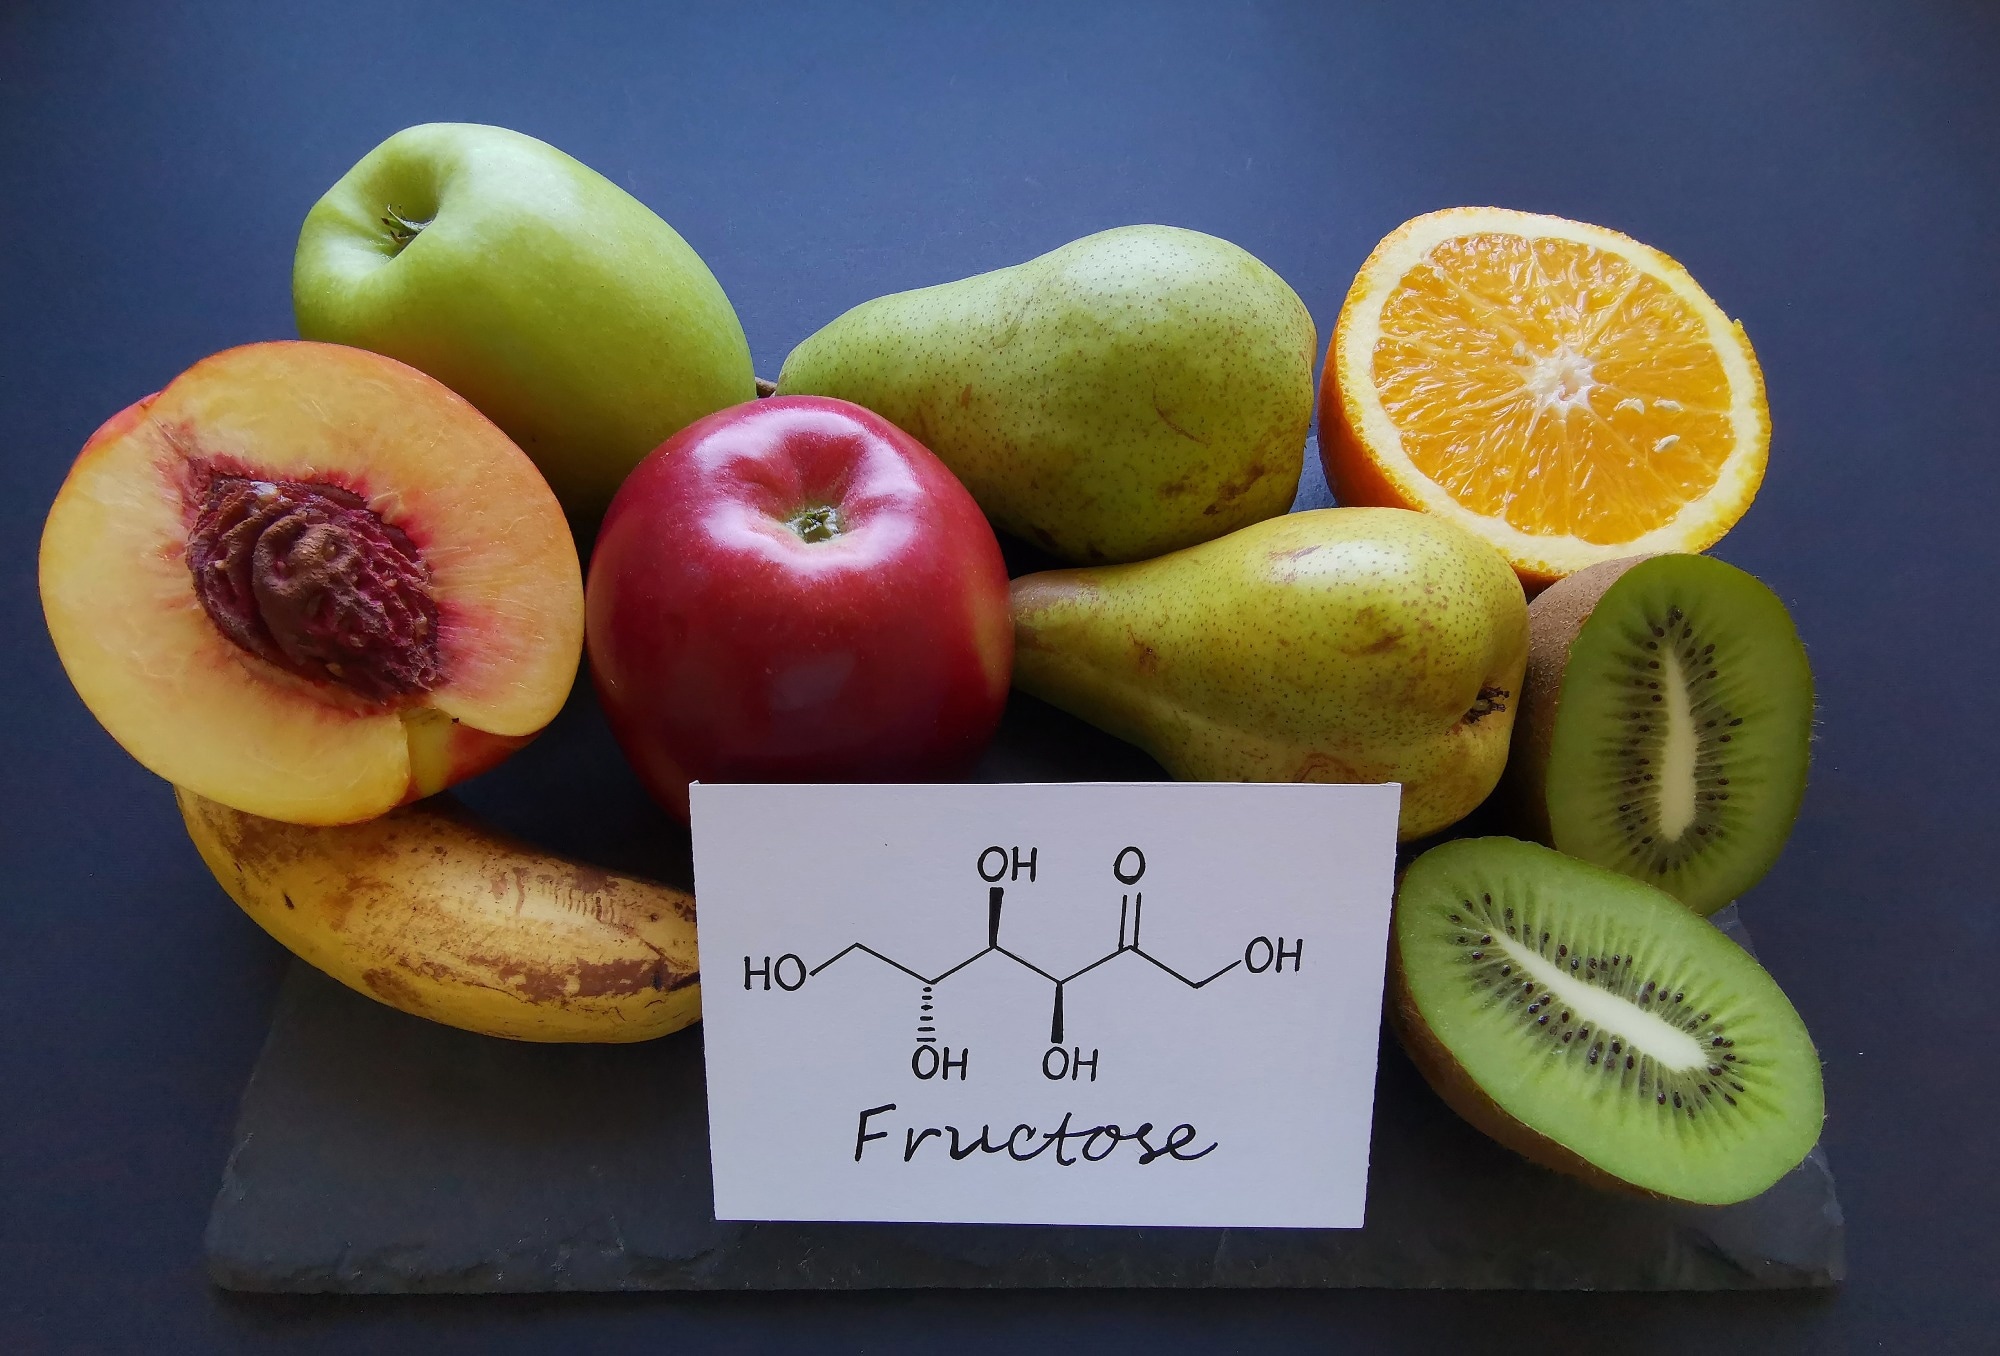 Study: Fructose consumption from different food sources and cardiometabolic biomarkers: cross-sectional associations in US men and women. Image Credit: Danijela Maksimovic/Shutterstock